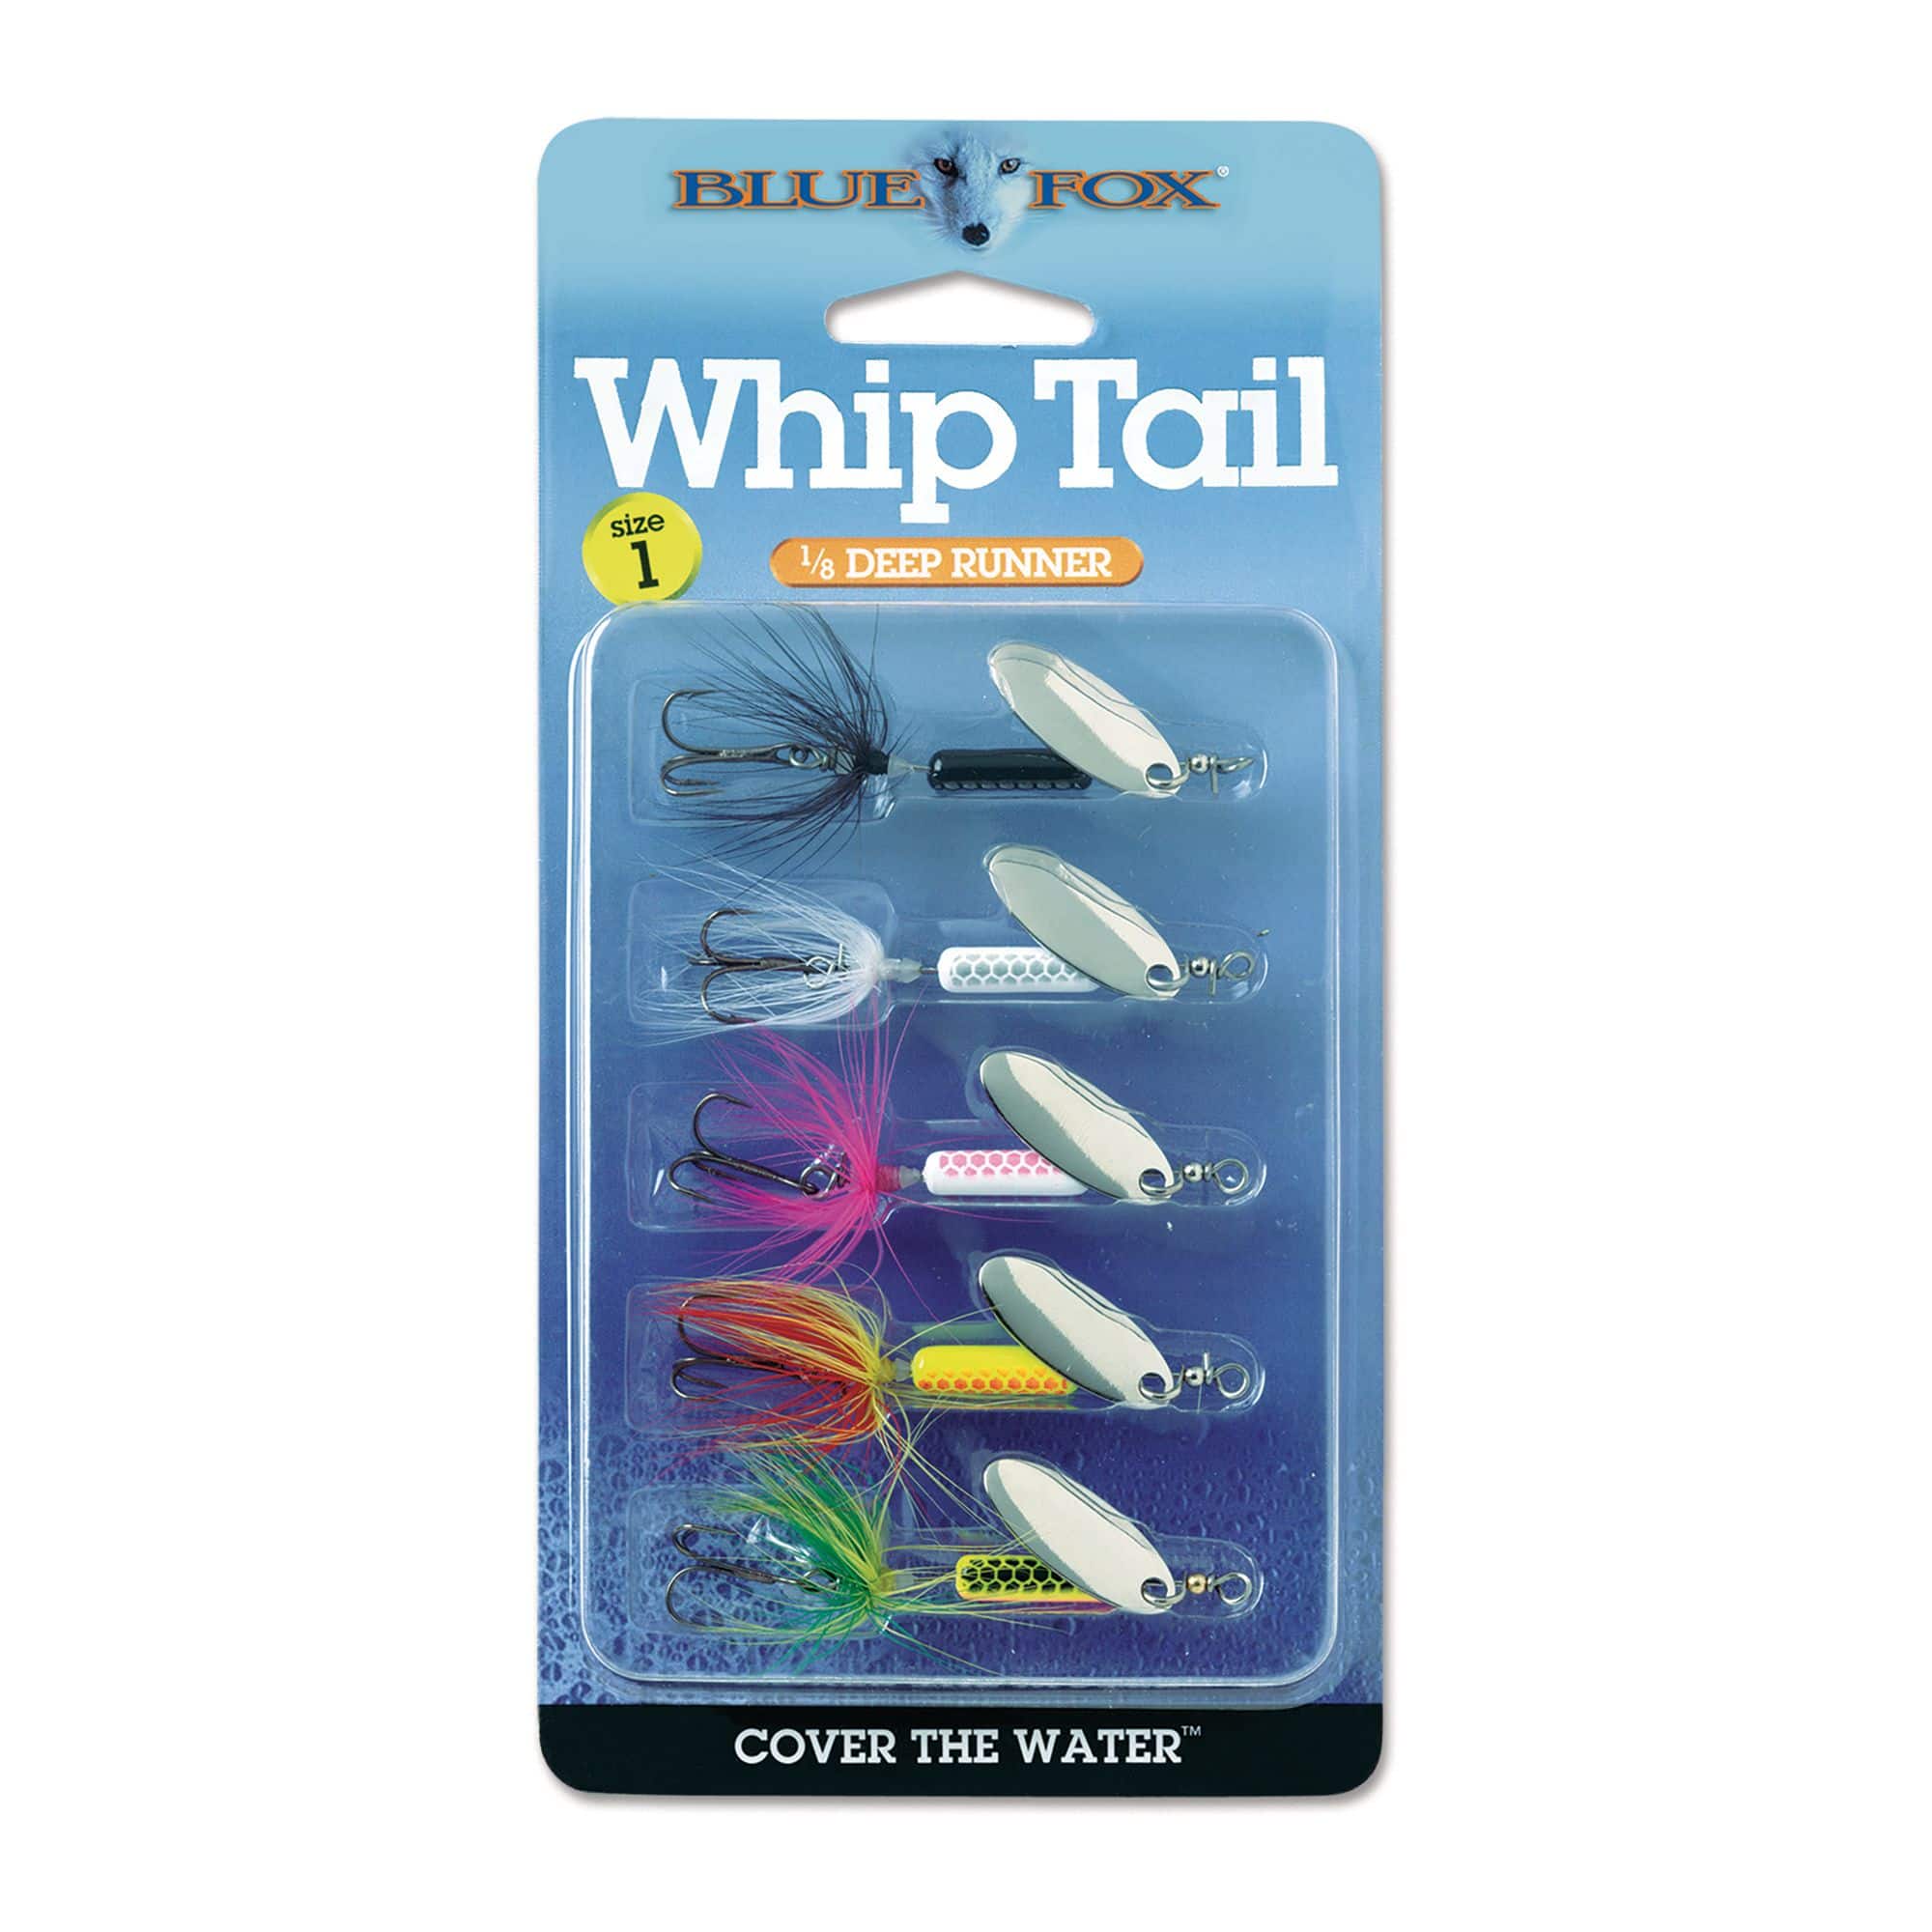 https://media-www.canadiantire.ca/product/playing/fishing/fishing-lures/0772902/blue-fox-whiptail-kit-5-pc-1-8-oz-7f6de4bc-f047-4178-86b0-a84c4cf63e9d-jpgrendition.jpg